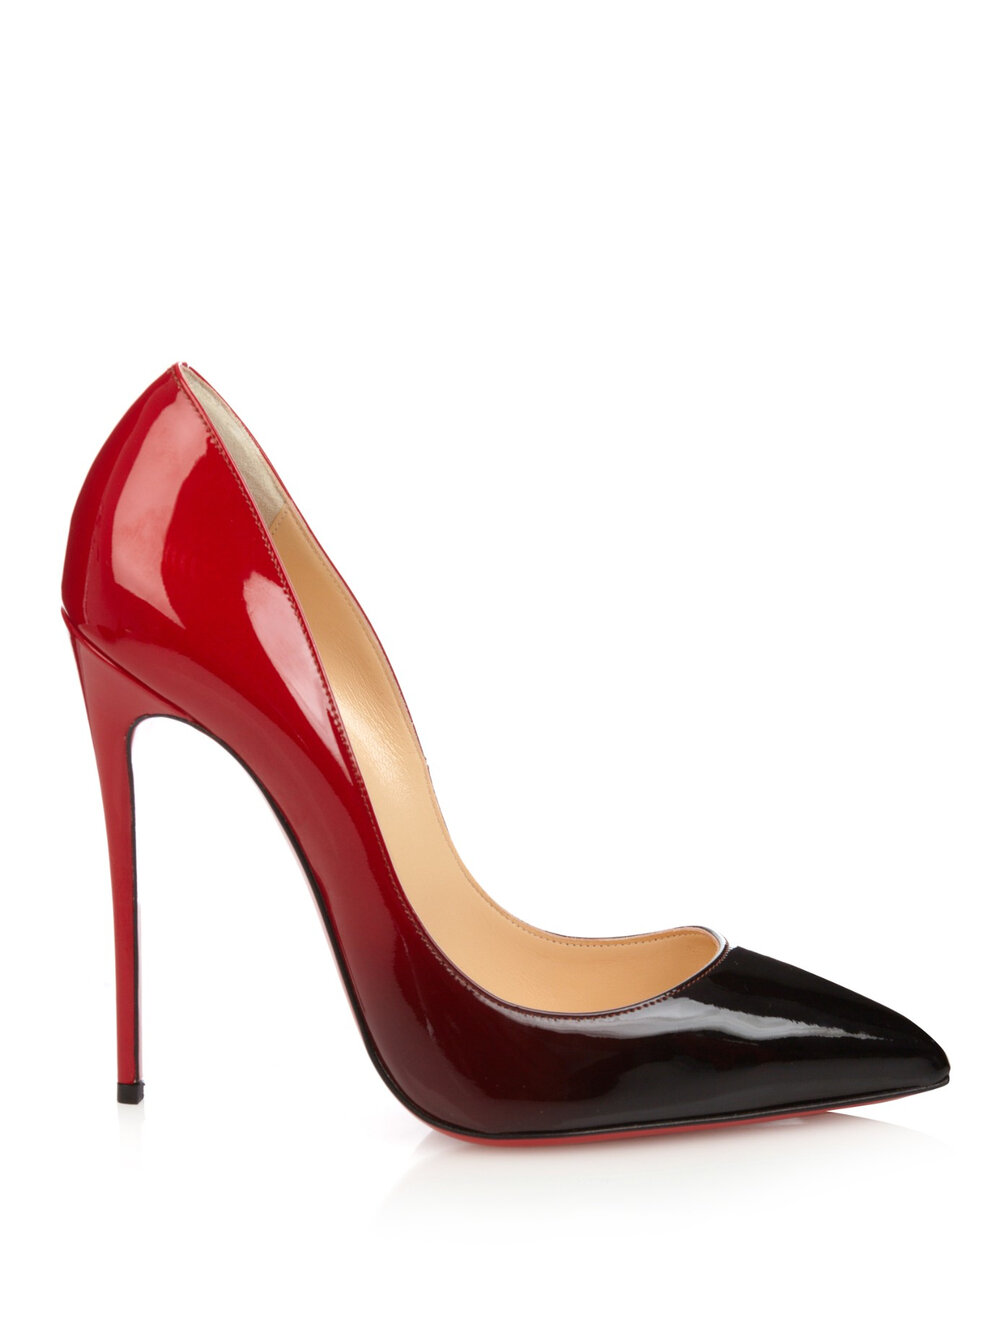 Christian Louboutin Pigalle 120mm vs. So Kate 120mm - Lust4labels